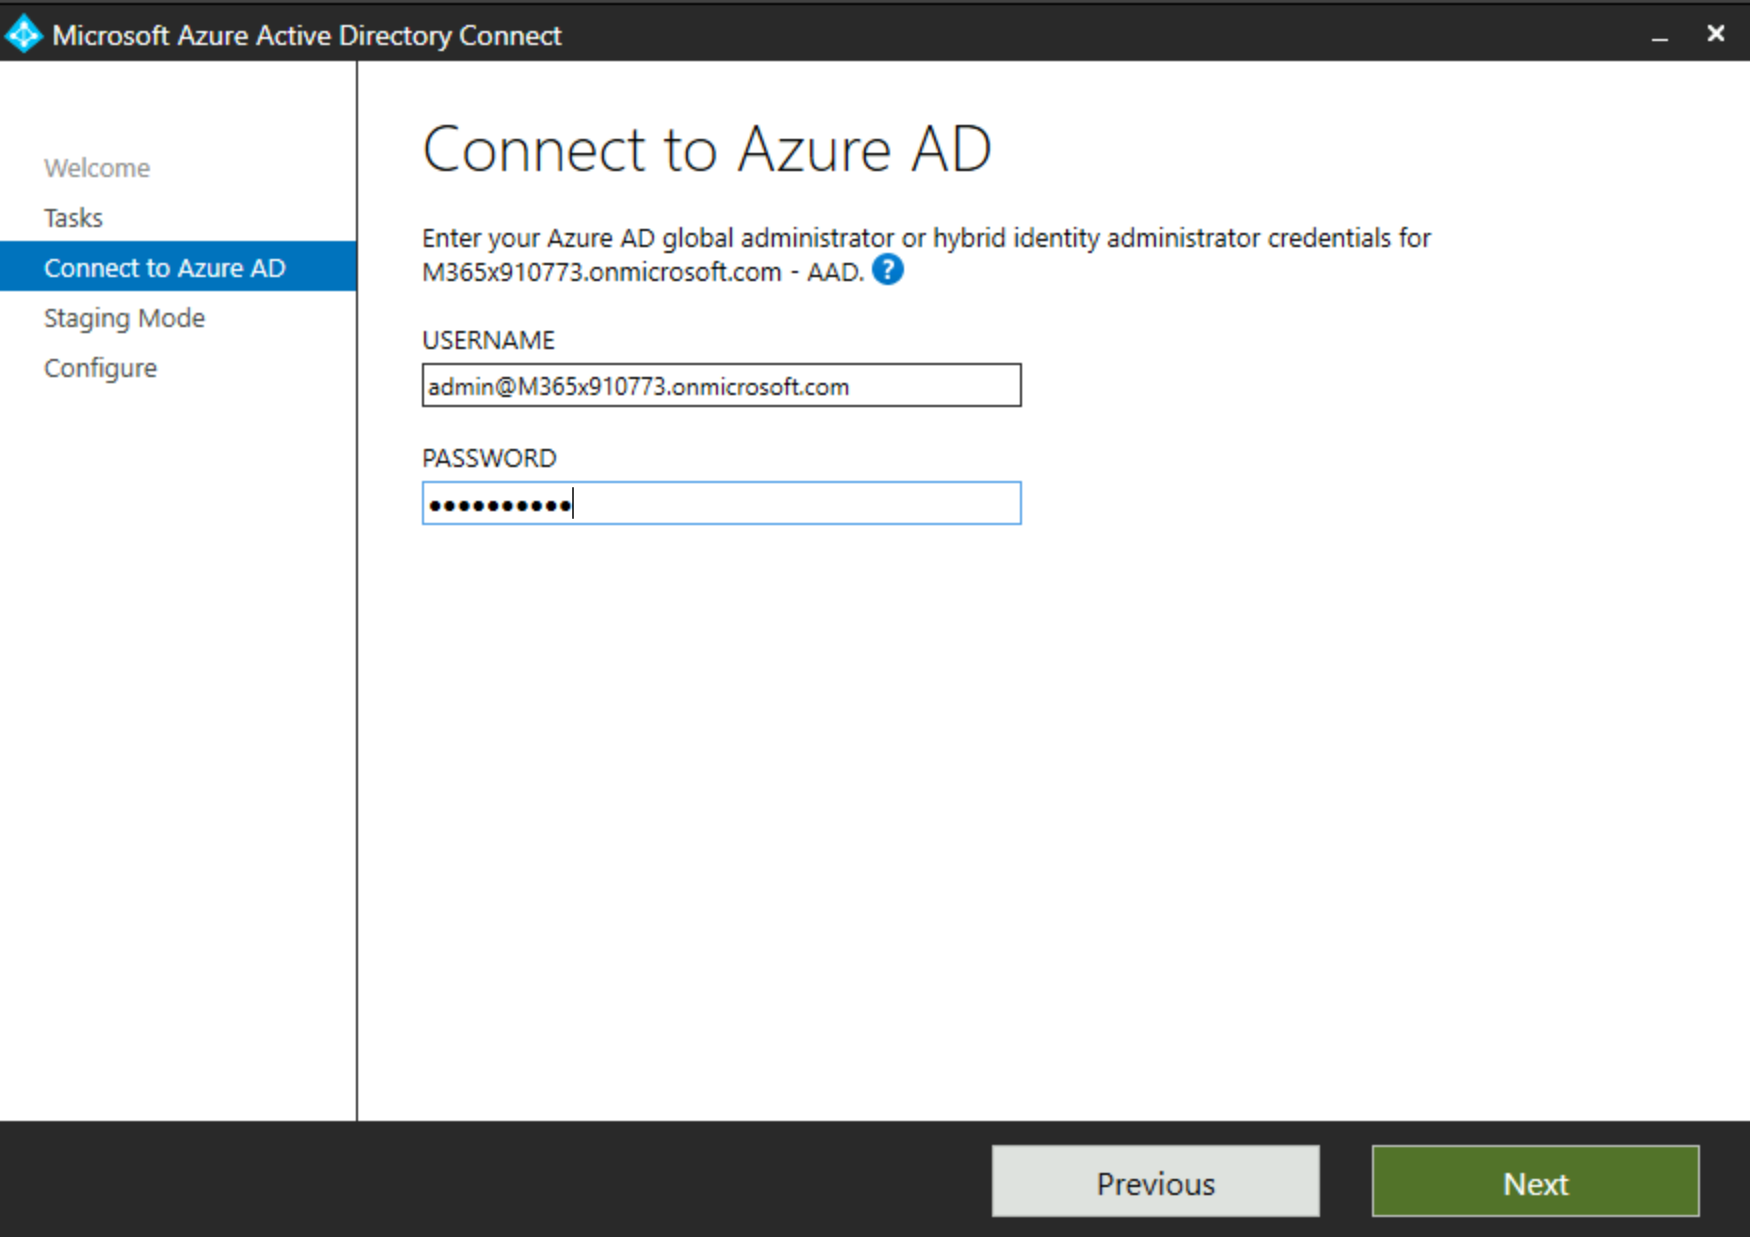 Screenshot shows Sign in prompt in the Active Azure AD Connect dialog box.